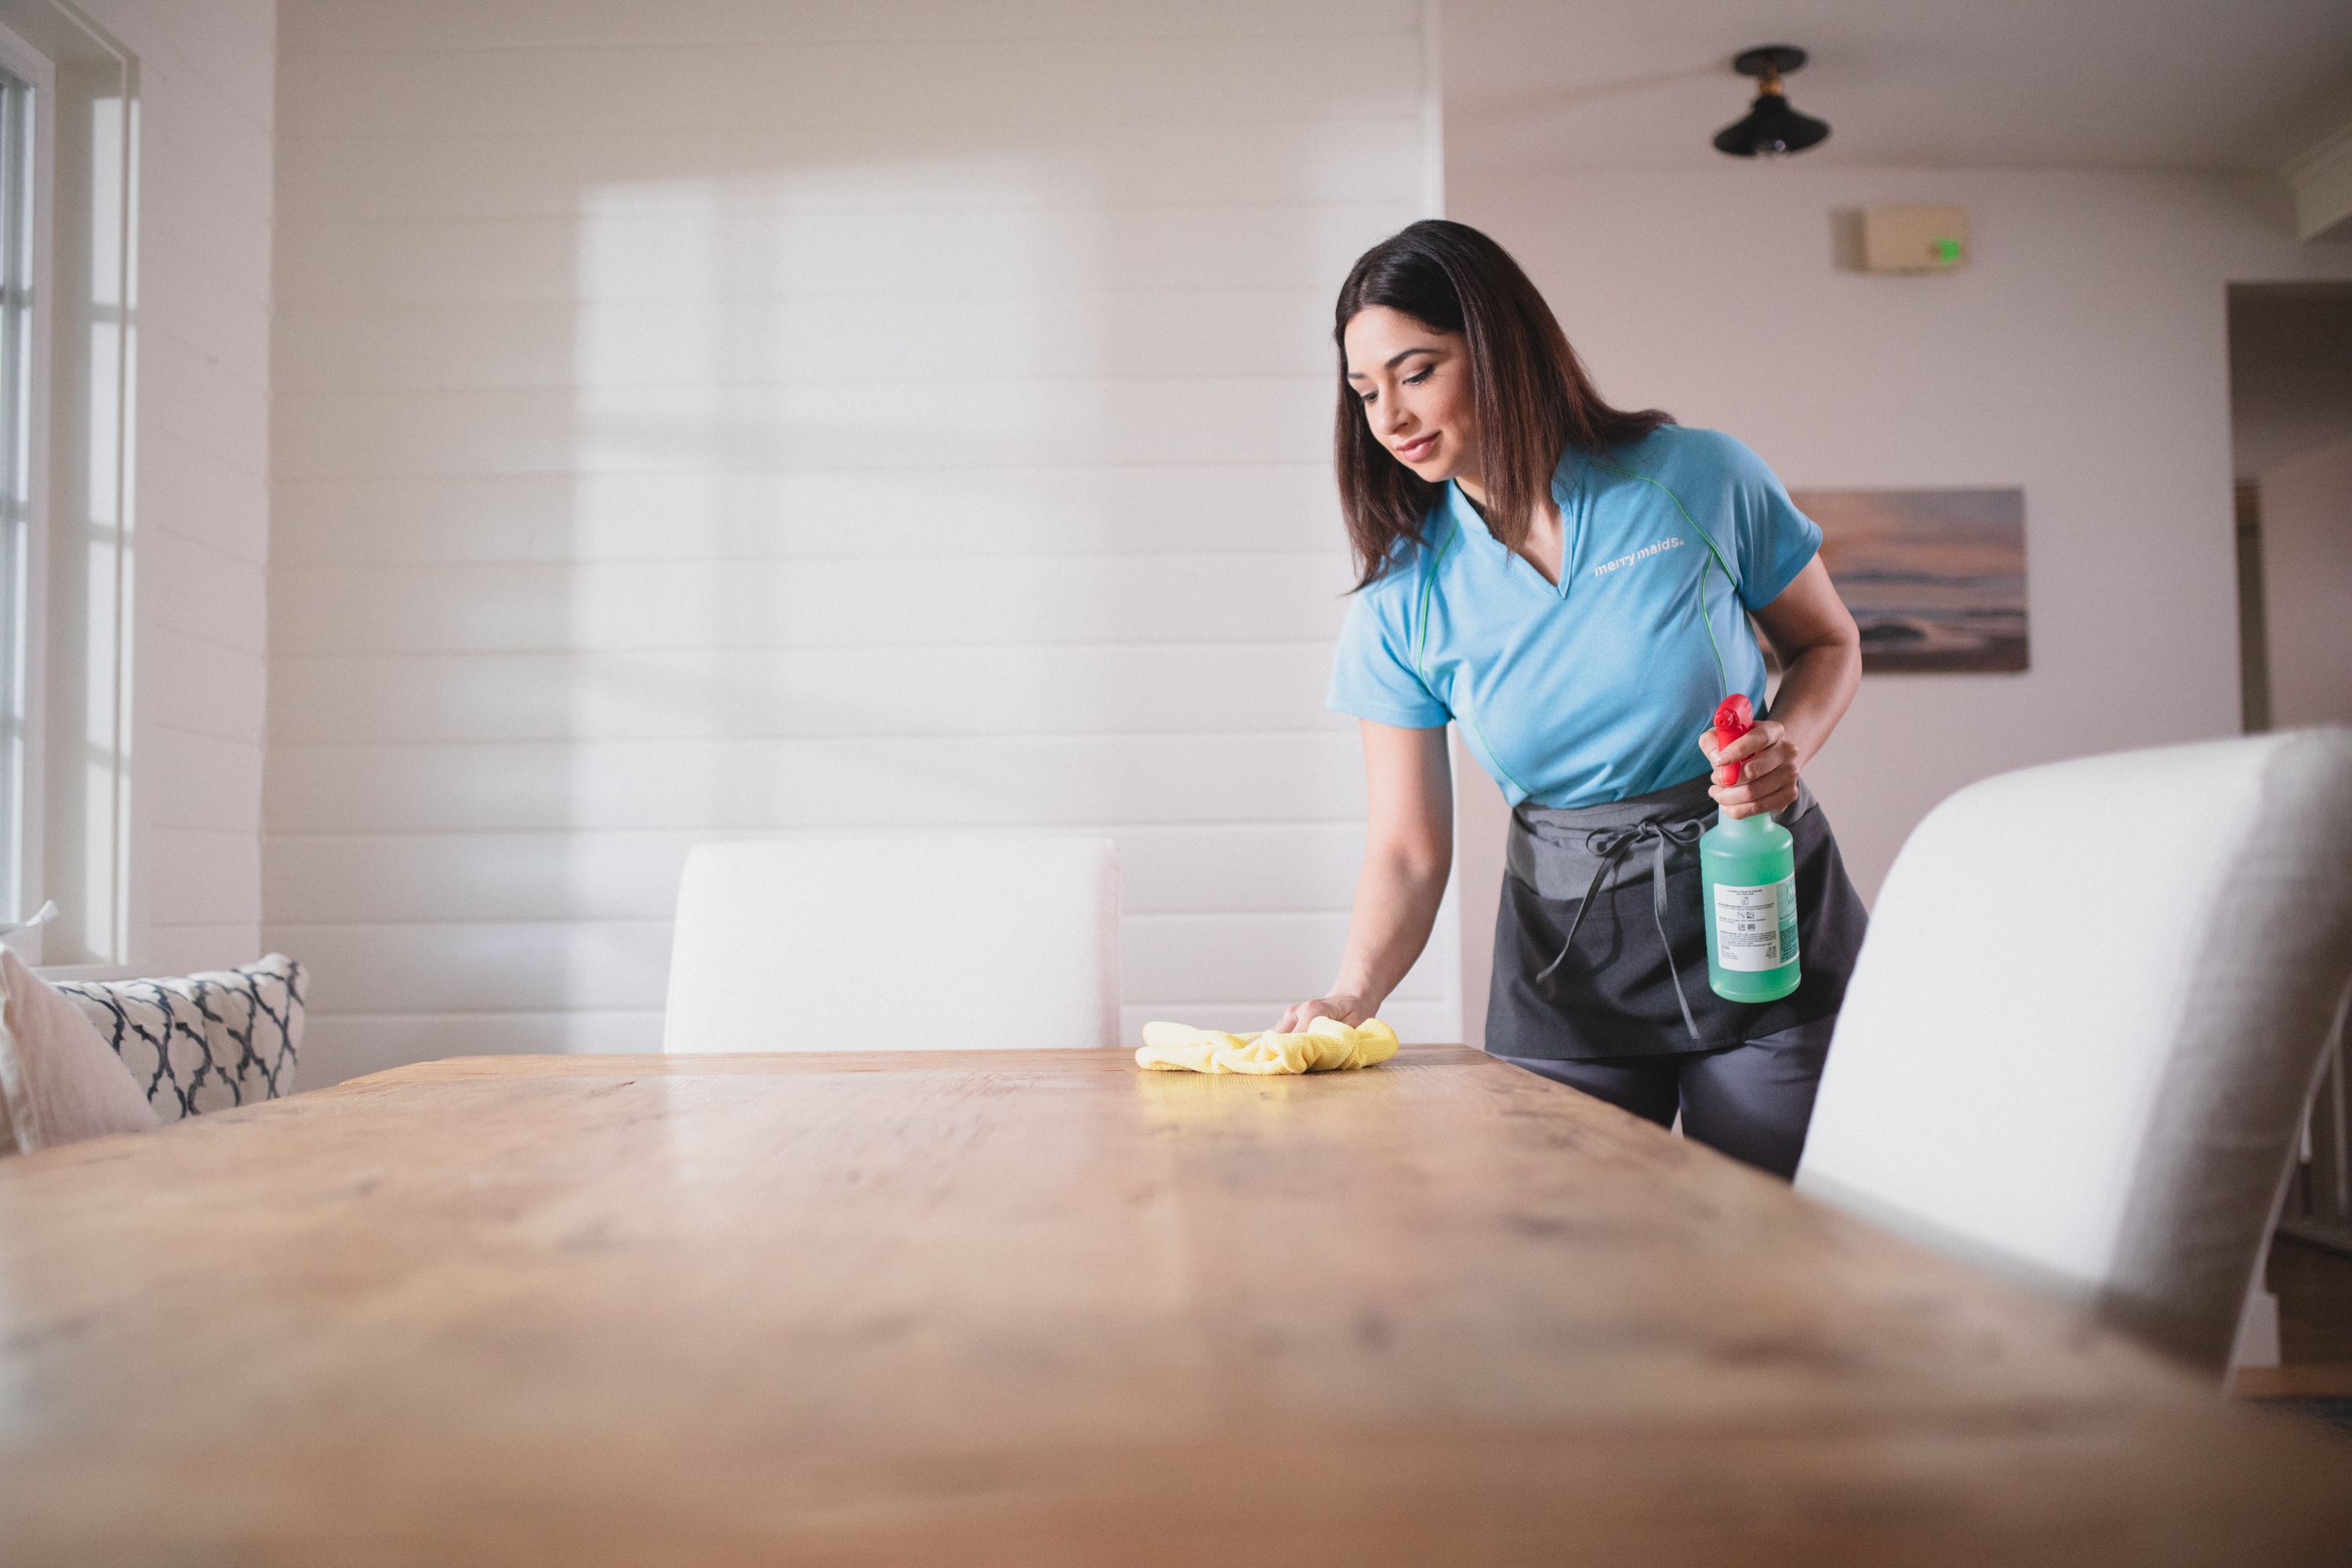 House cleaner from Merry Maids of Sarasota and Bradenton